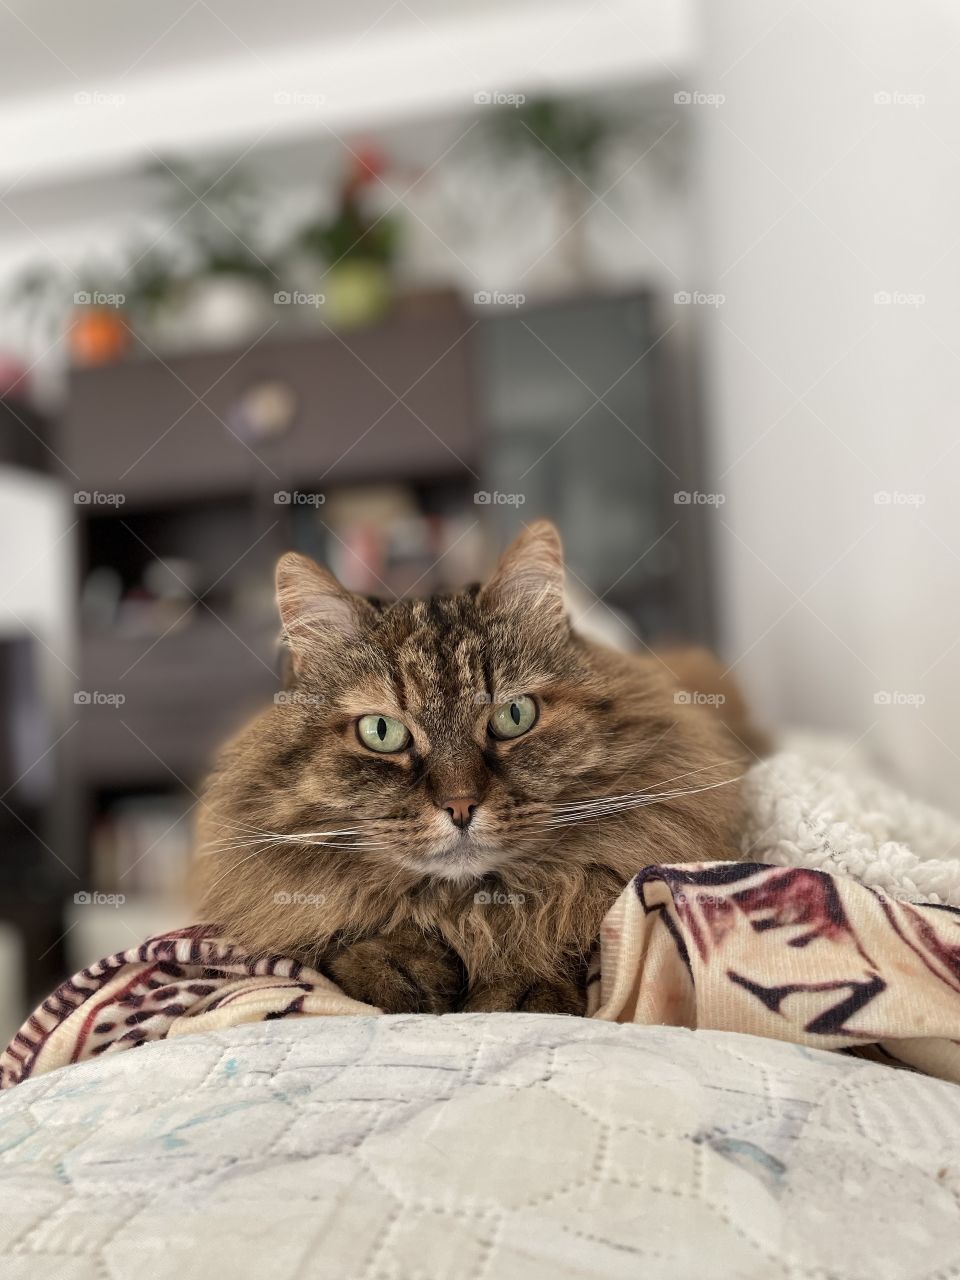 Adorable long haired cat of siberian breed in relax indoor on a sofa. Brown mackerel hair type 